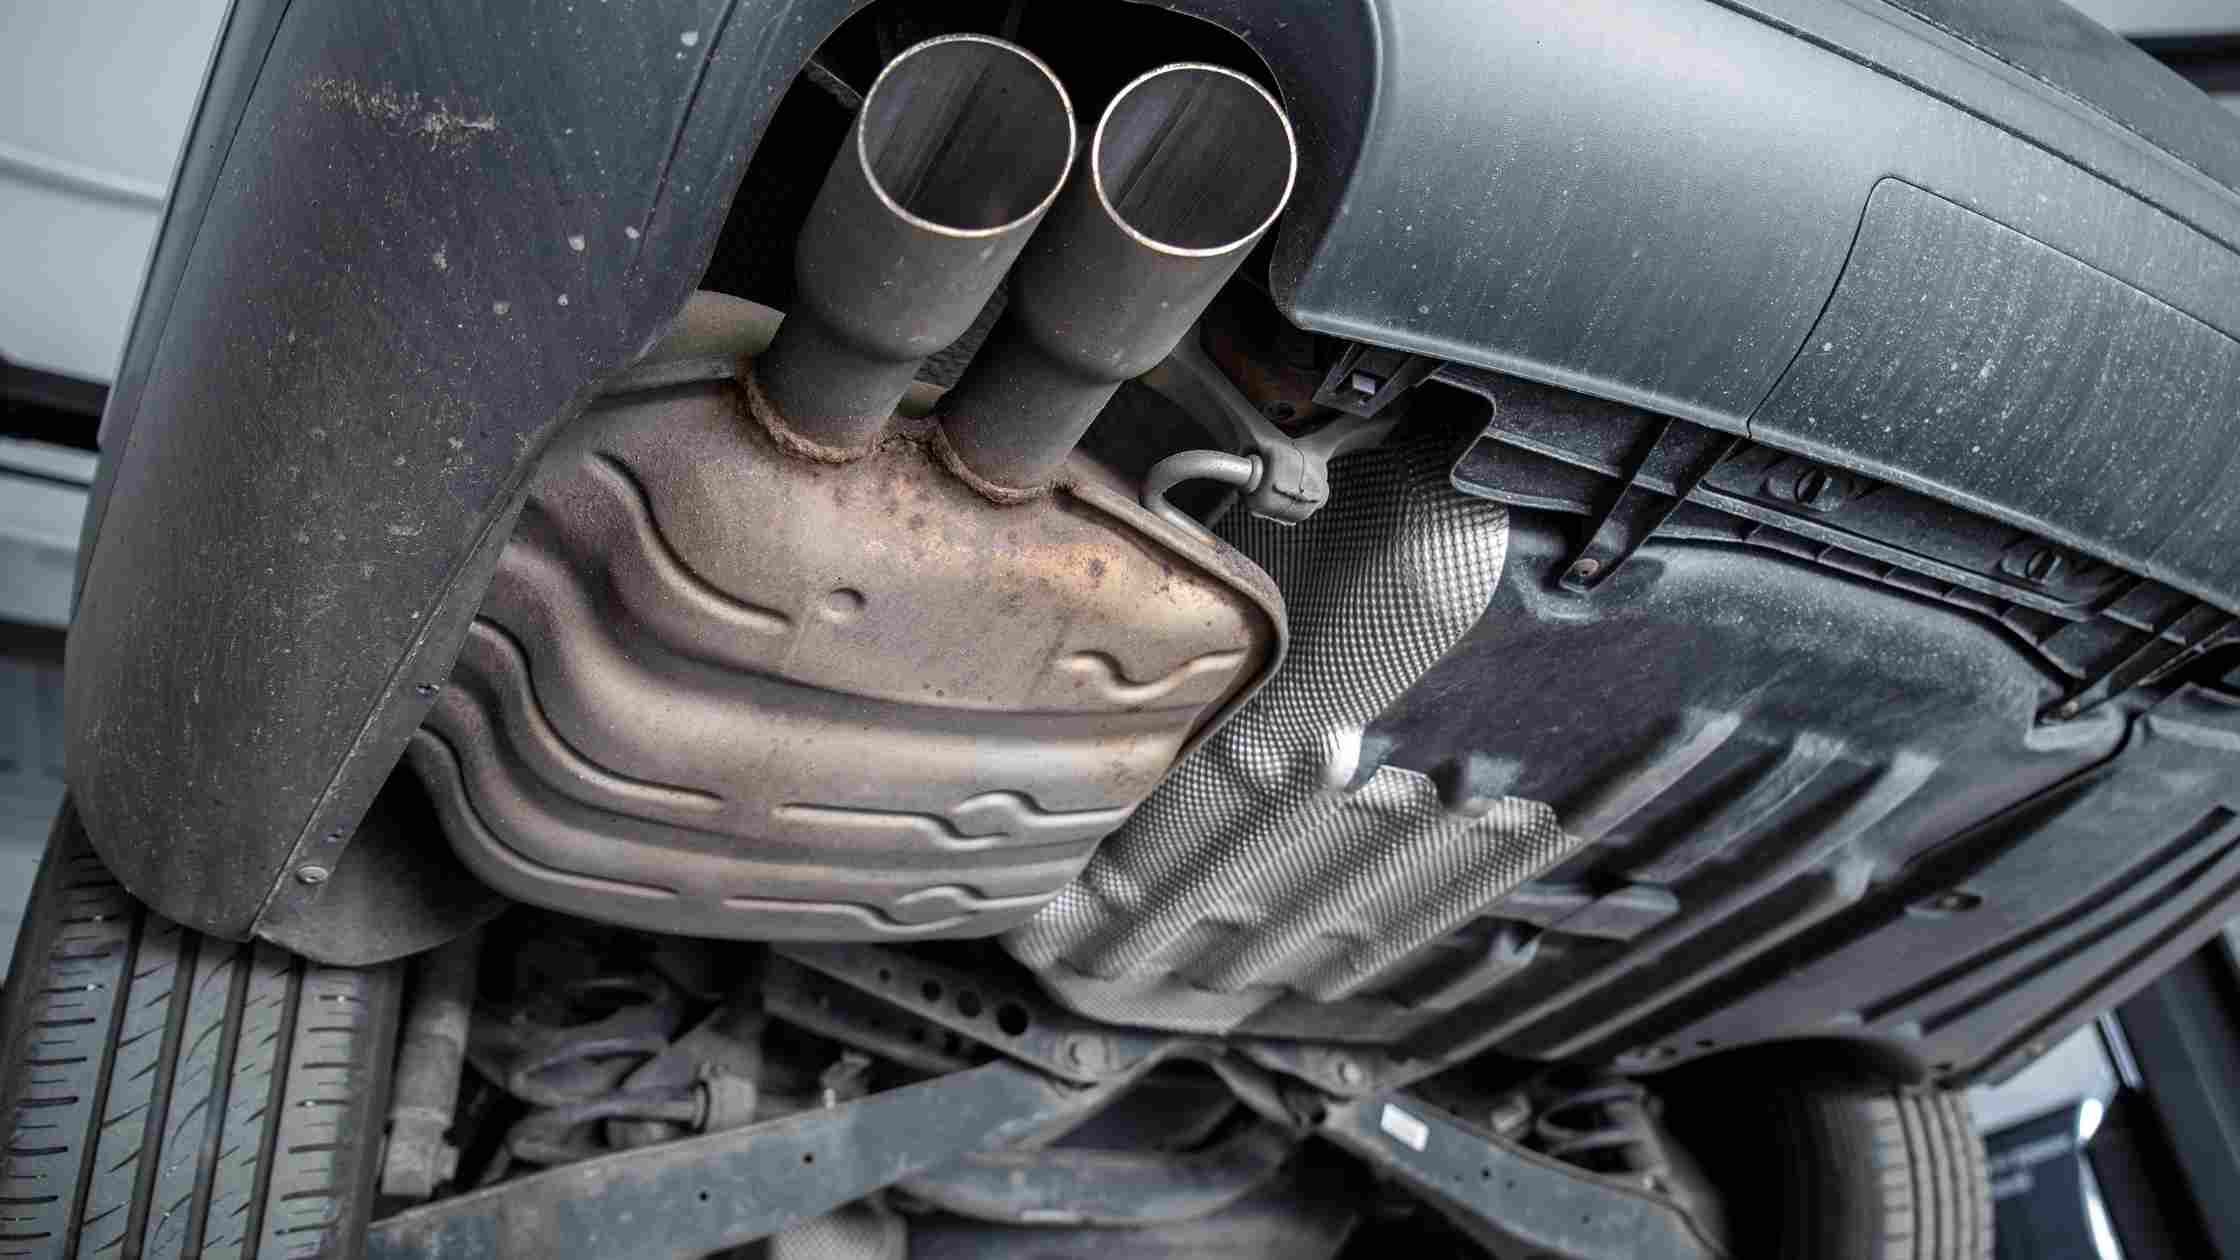 5 Simple Ways To Make Car Exhaust Quieter Without Muffler